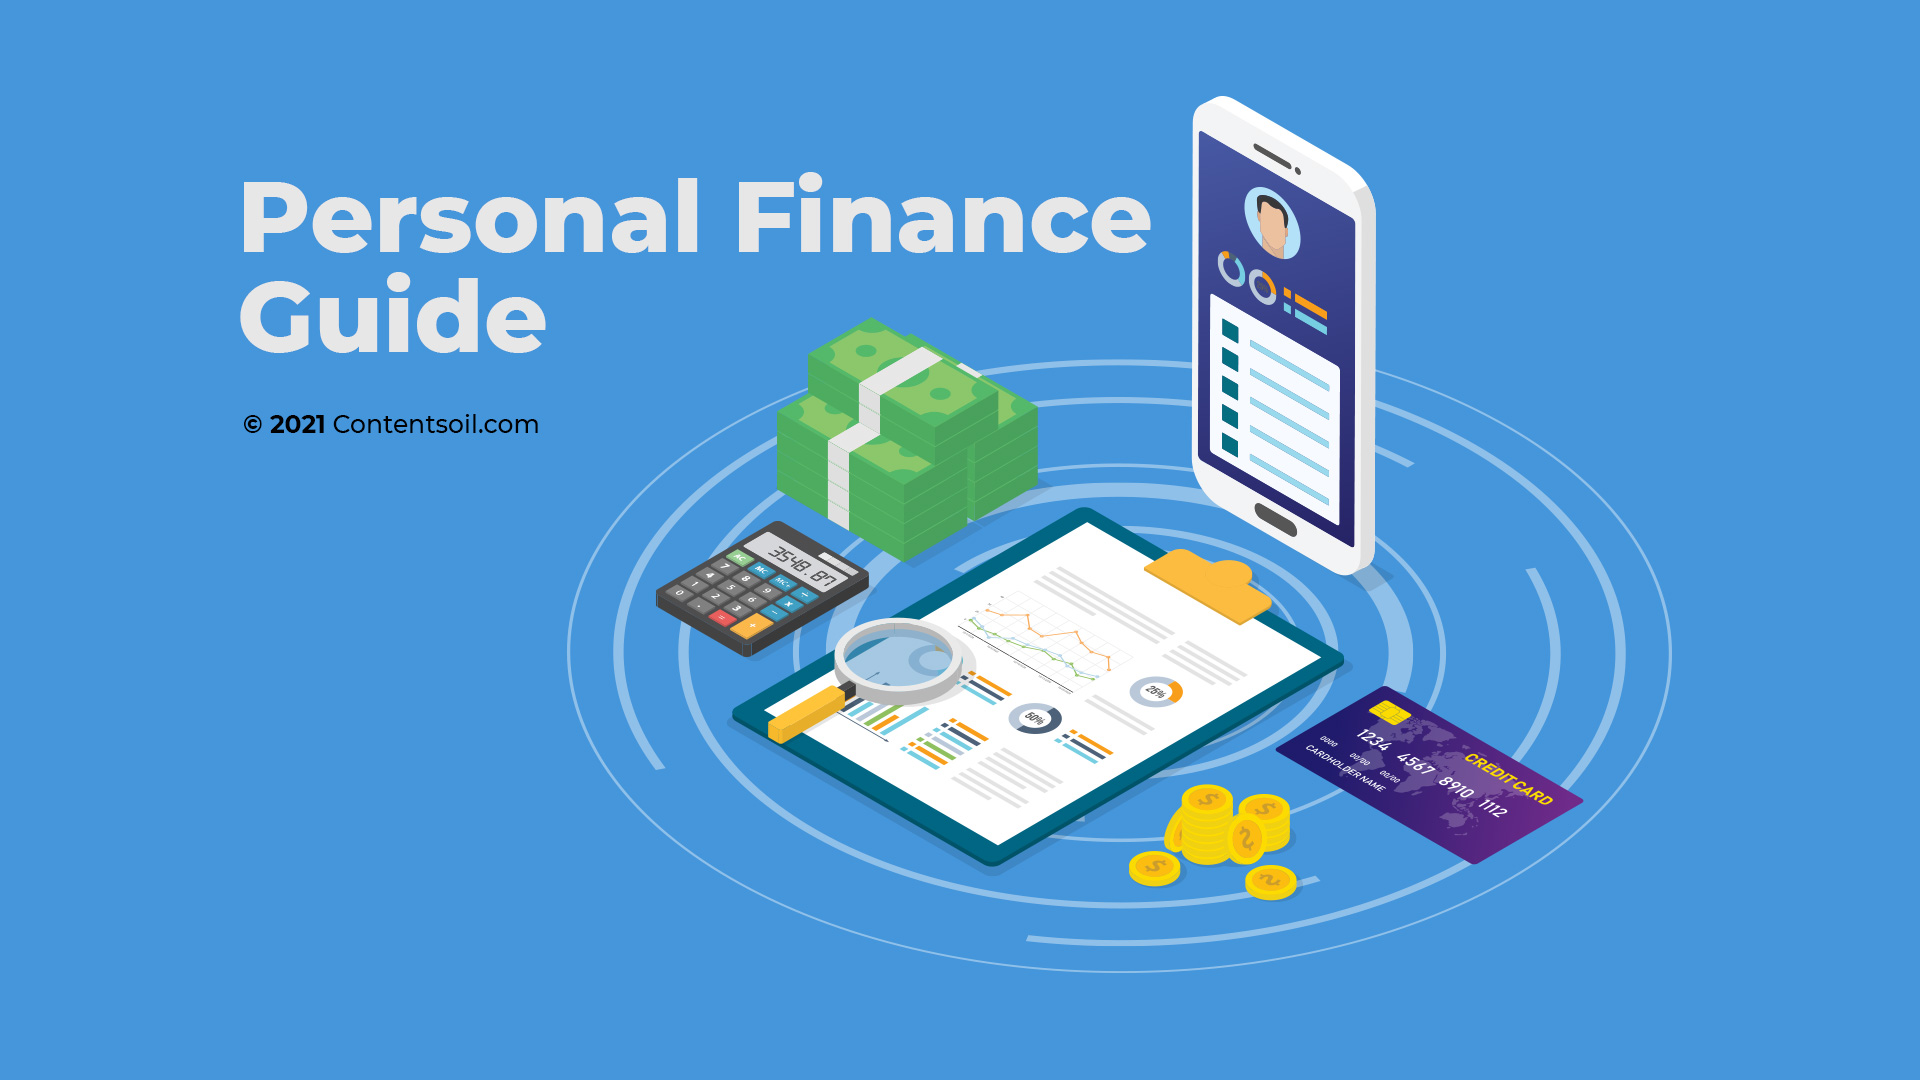 see finance guide